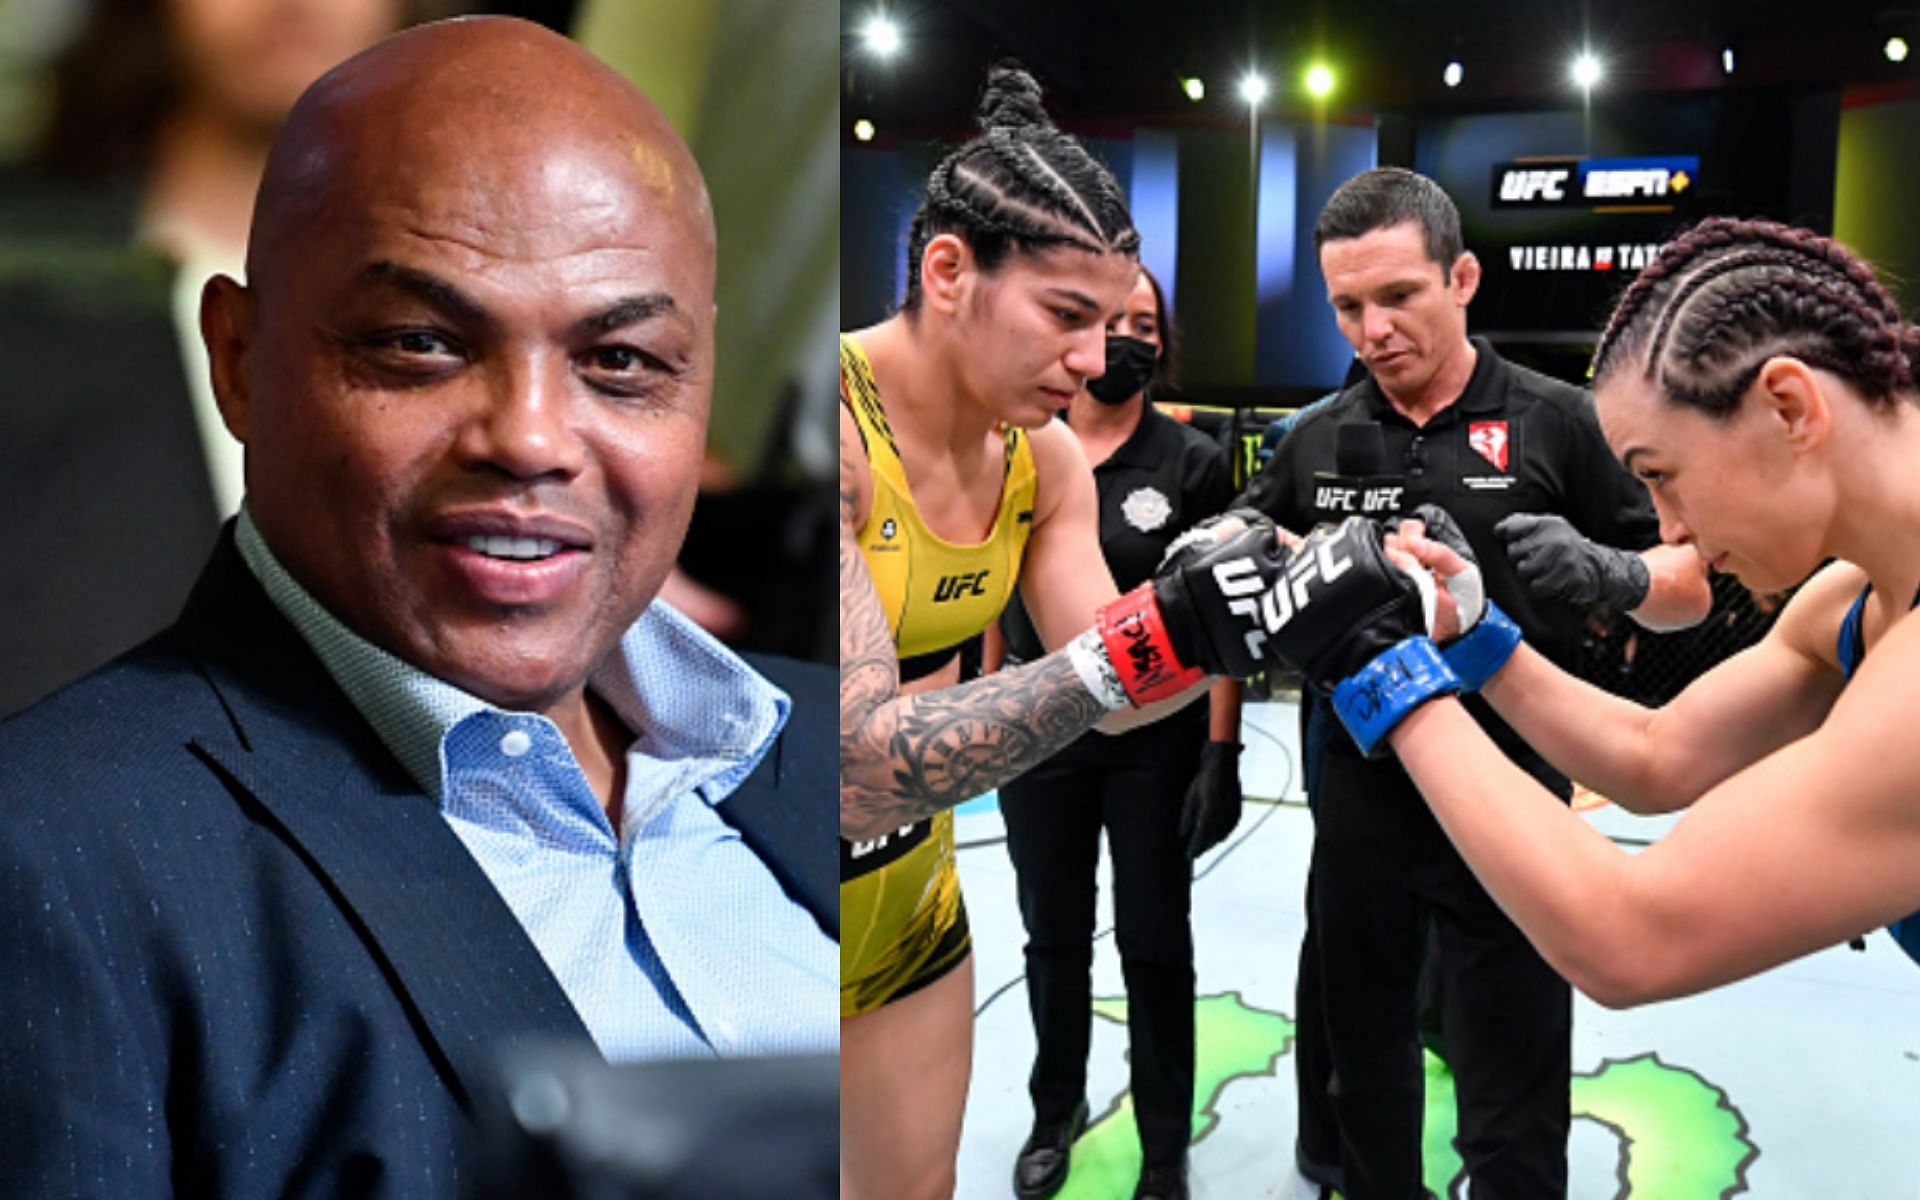 Charles Barkley at the Apex (left); Vieira faces off with Tate inside the octagon (right)